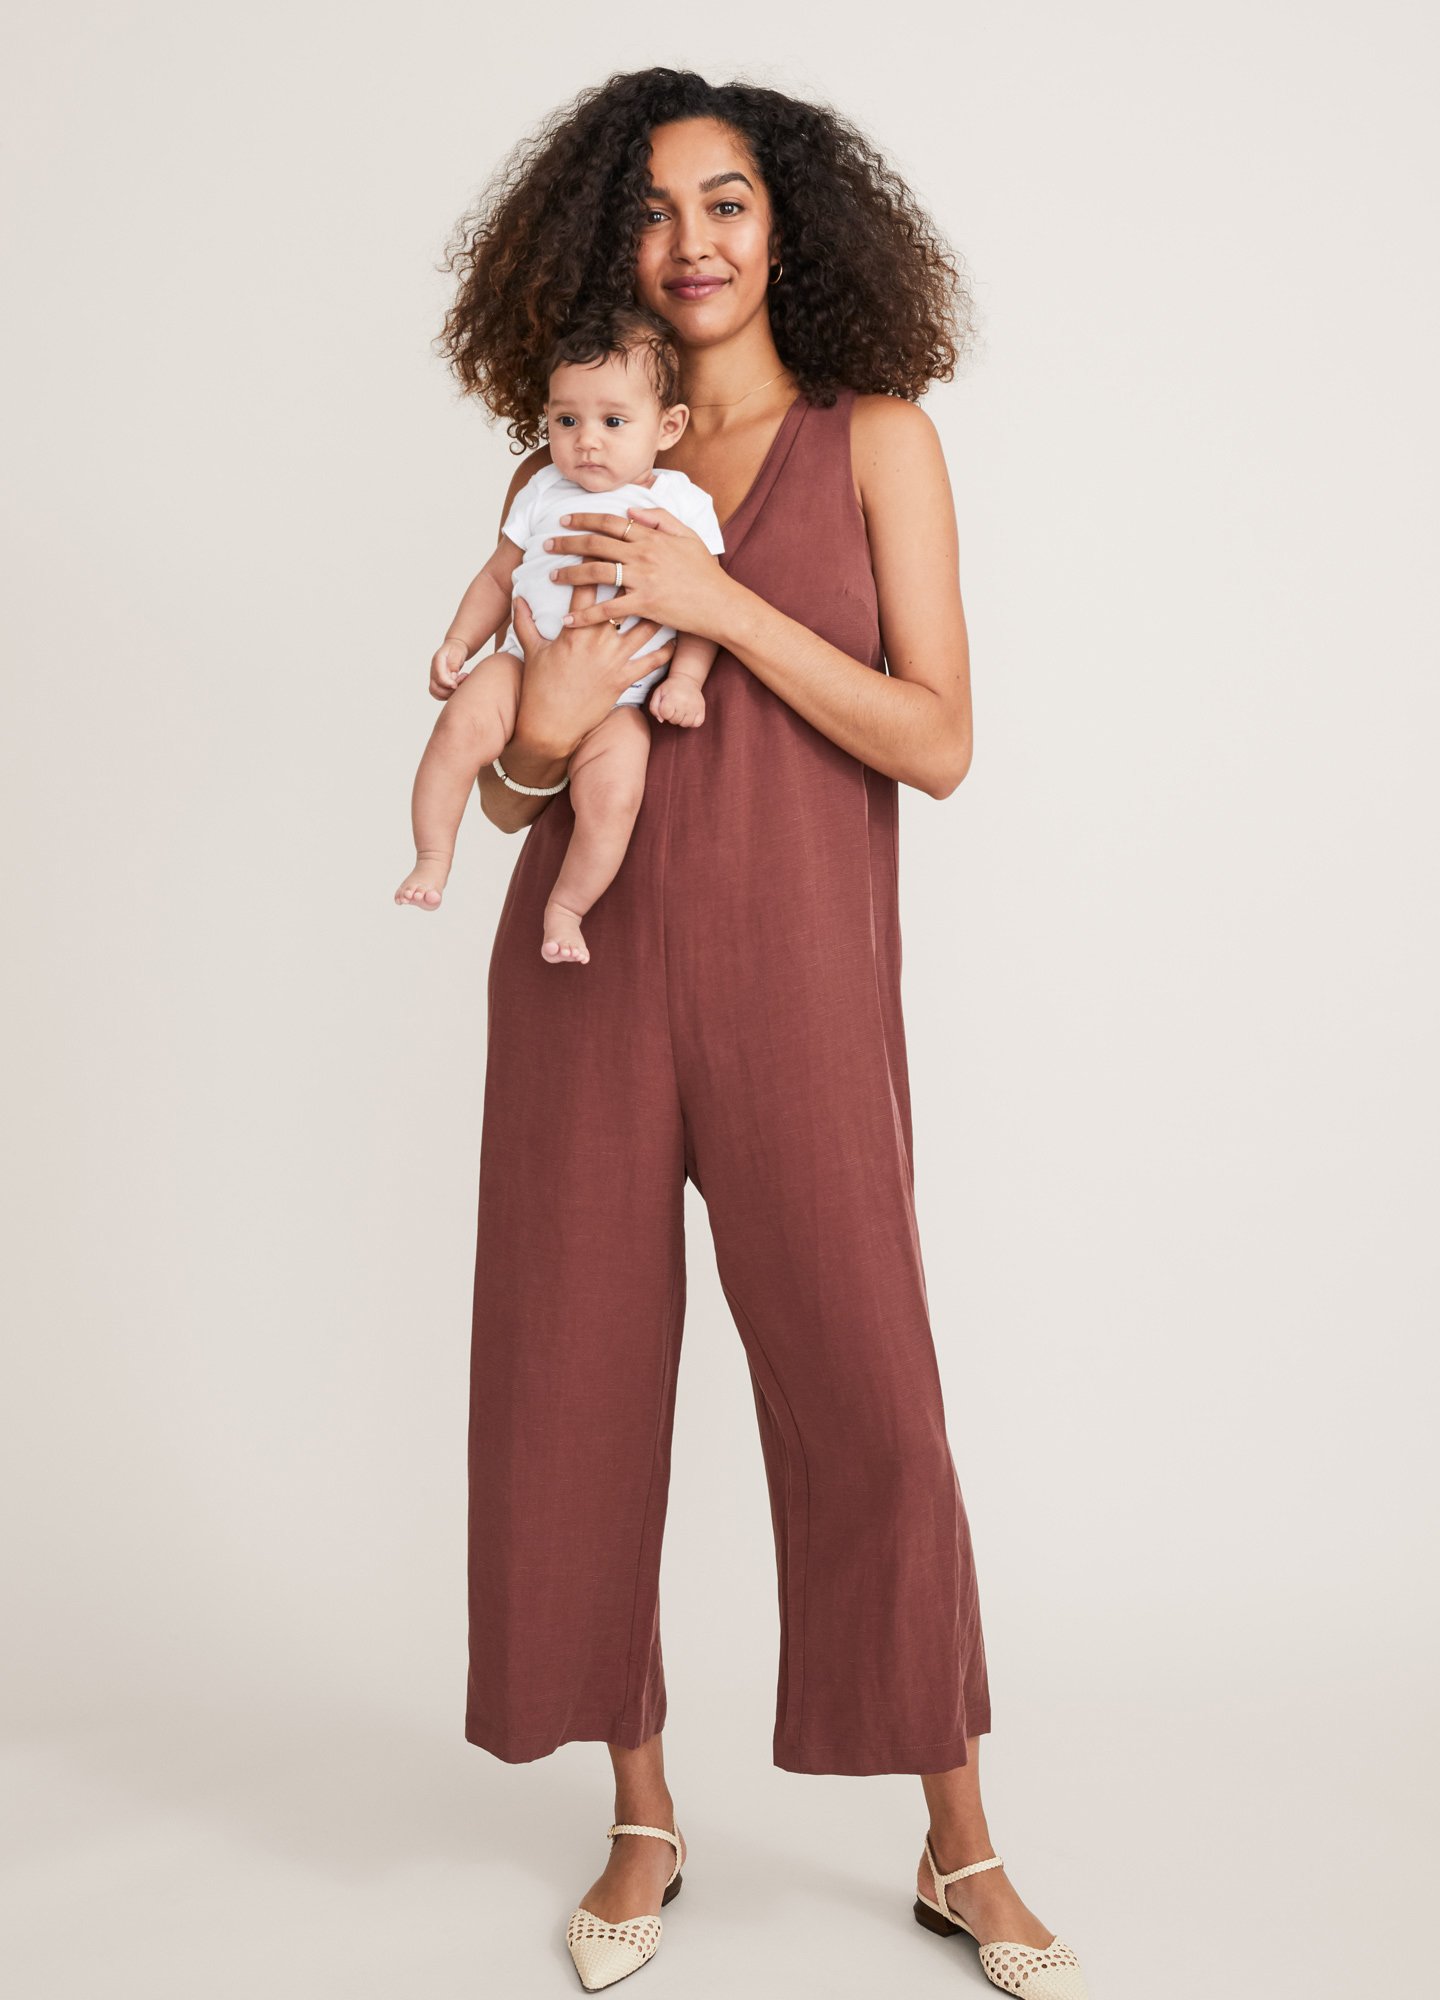 Every Postpartum Mom Needs This New Collection From HATCH - Tinybeans